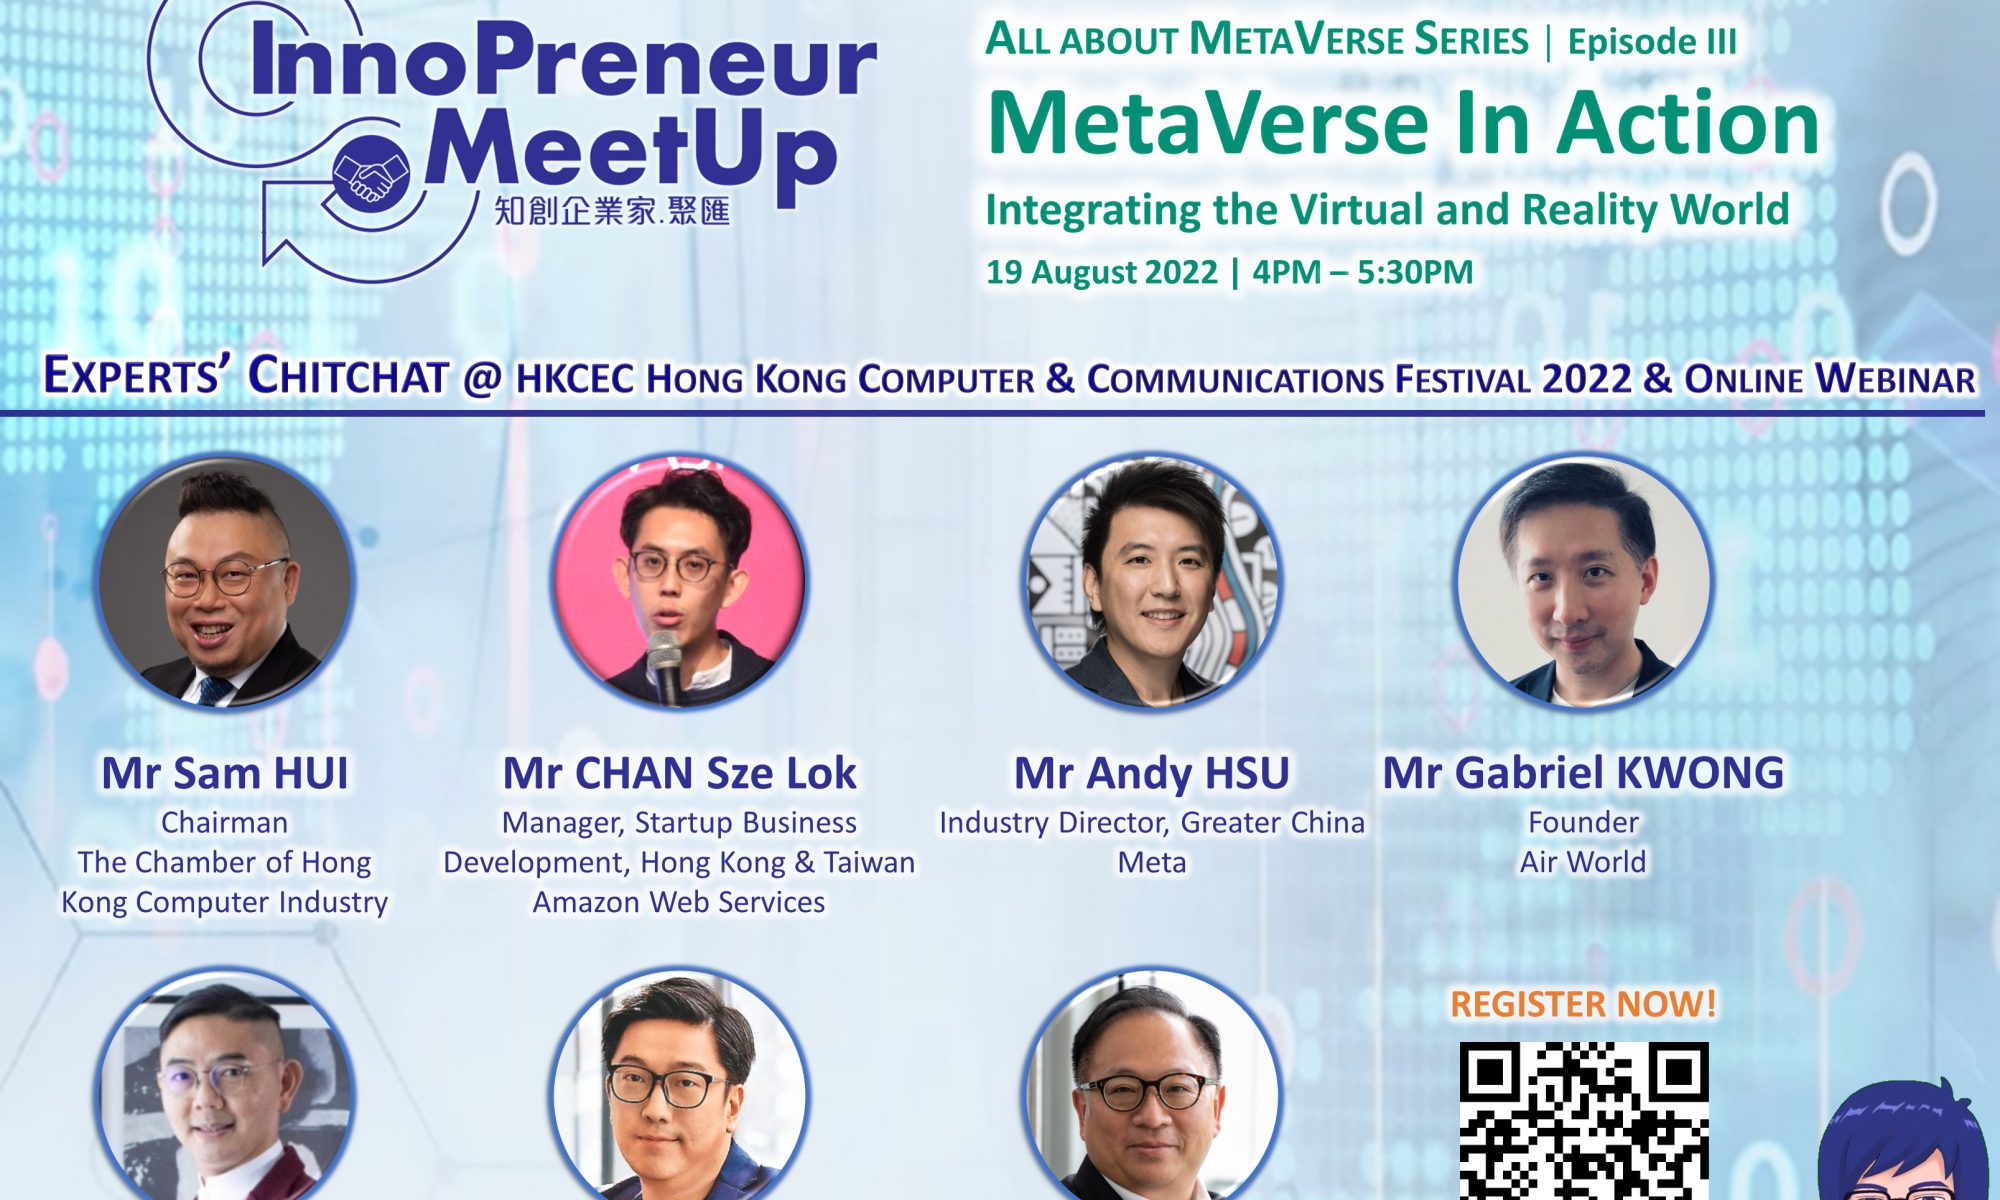 [All About MetaVerse Series - Episode III] "MetaVerse In Action – Integrating the Virtual and Reality World"